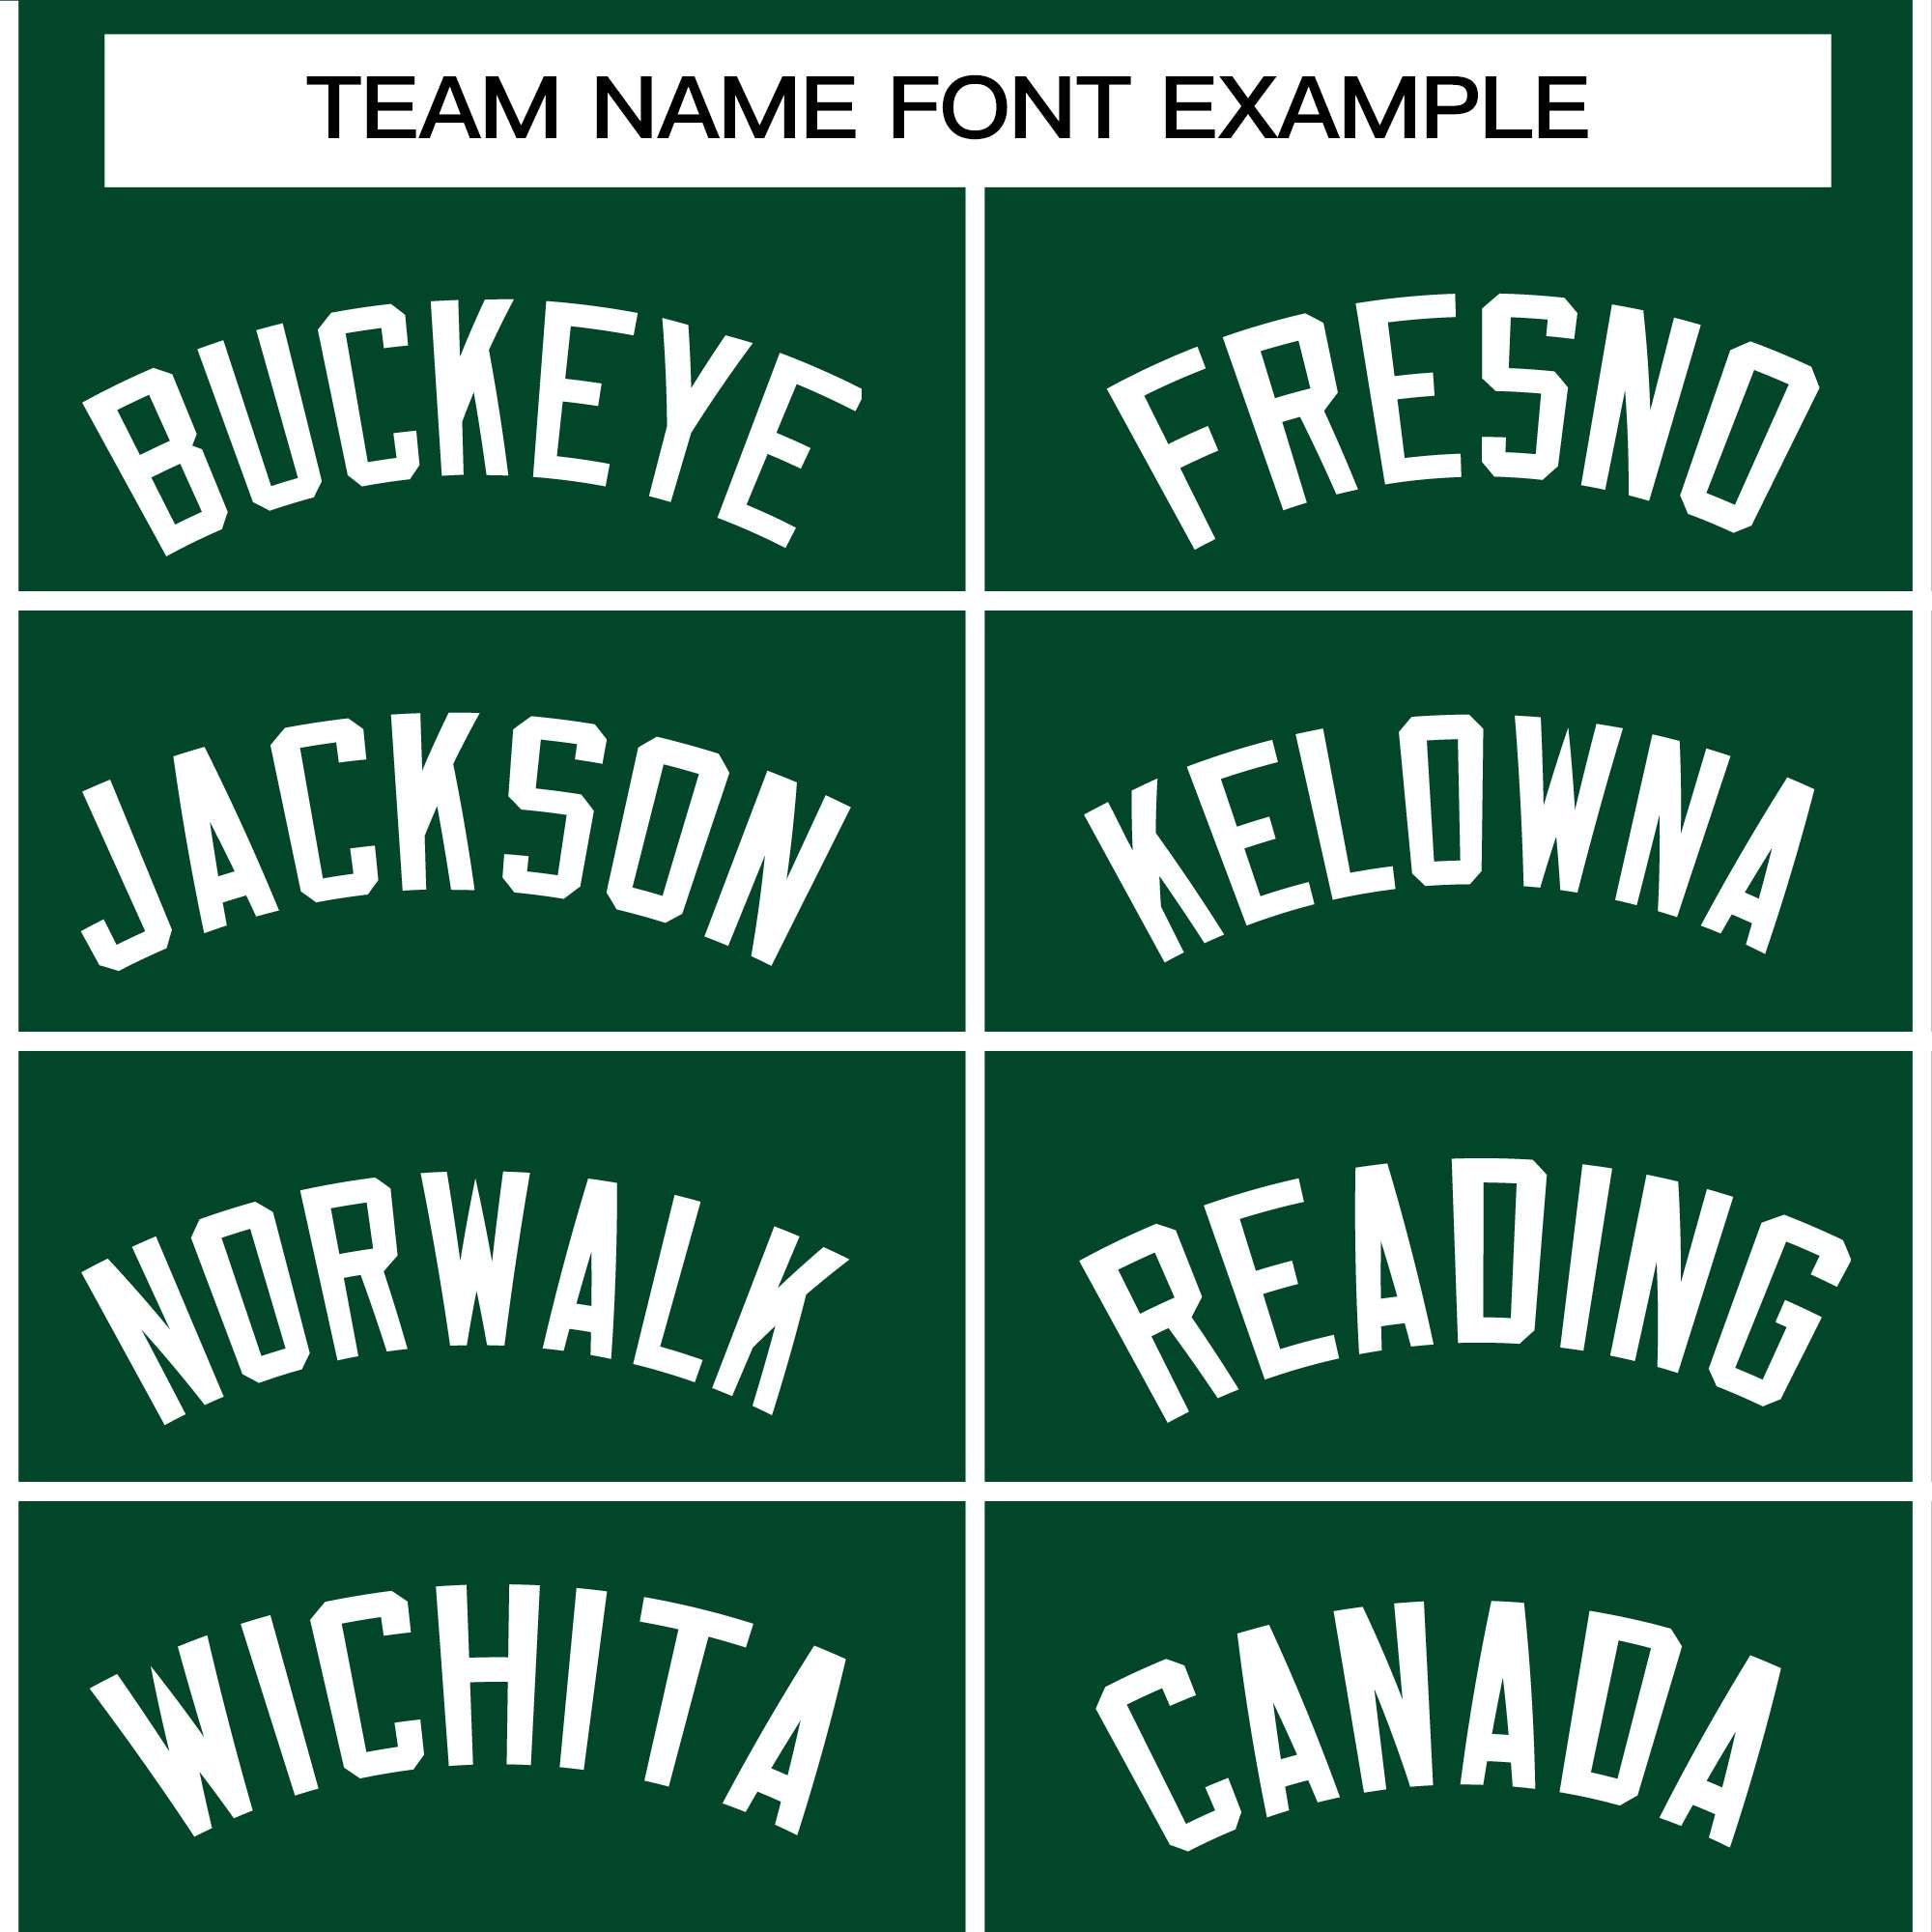 custom green pullover hoodies team name font example